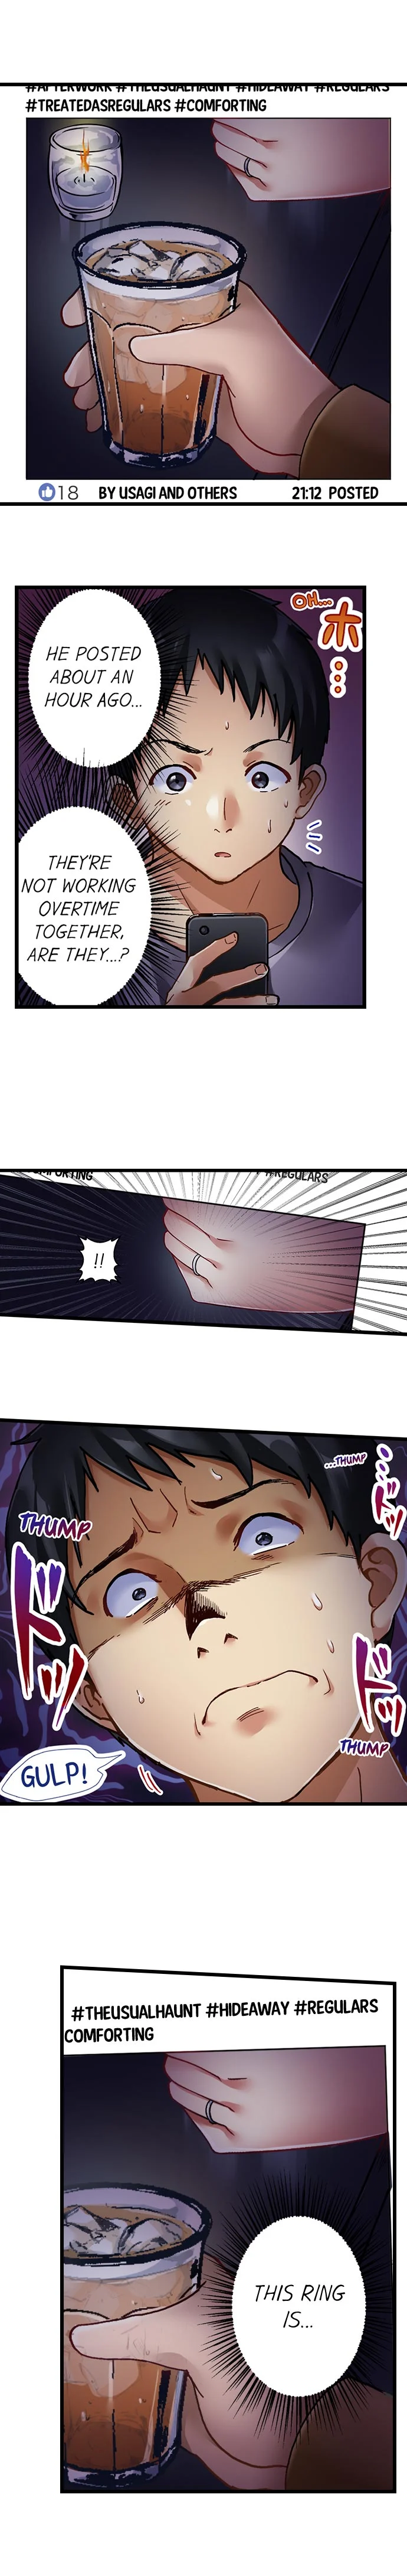 Selling My Wife’s Secrets - Chapter 7 Page 9